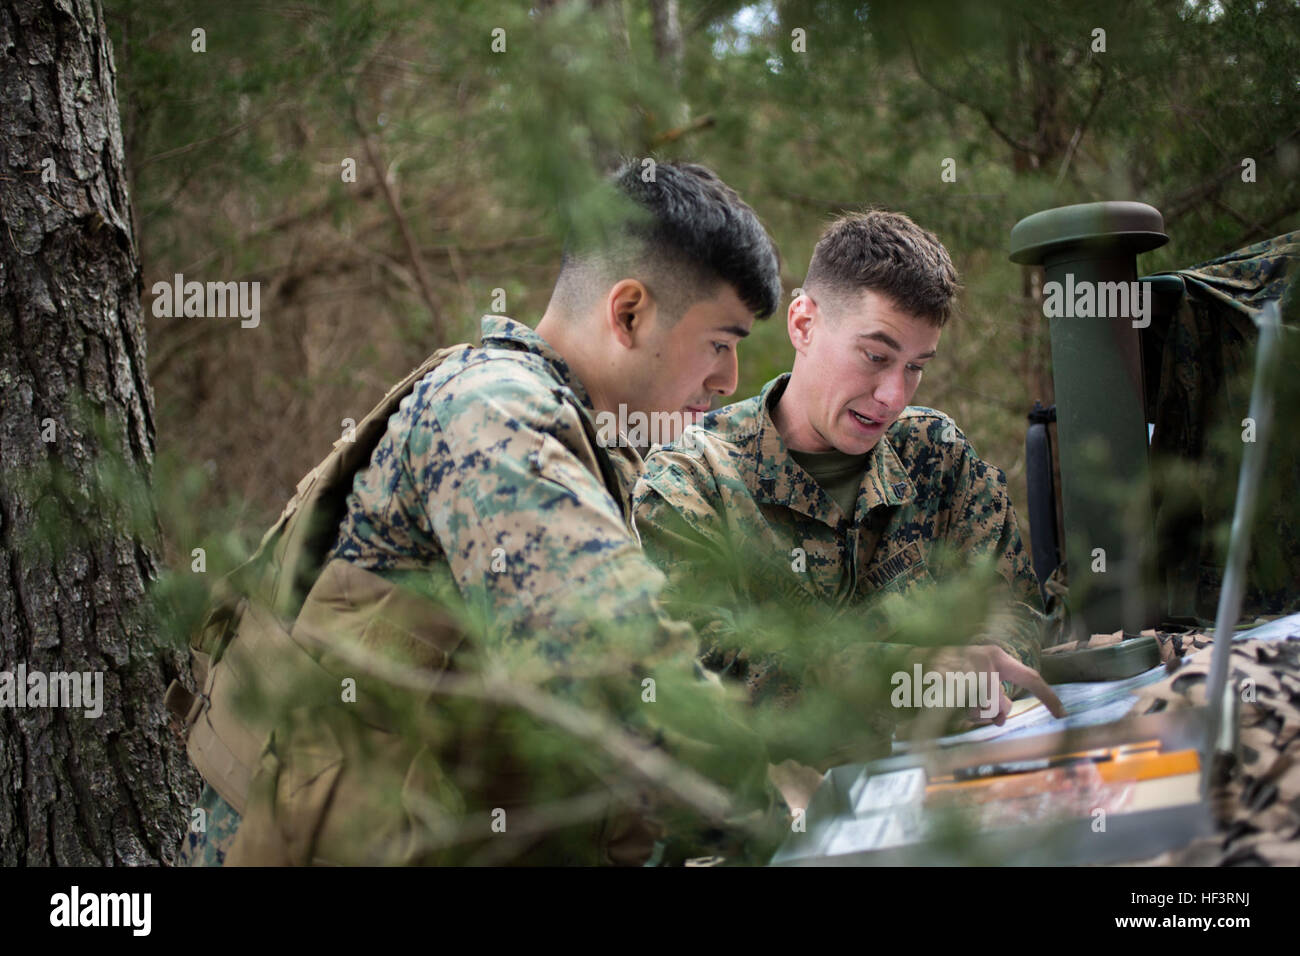 U.S. Marine Corps Lance Cpl. Enrique Delavega, left, and Cpl. Dakota H. Messier, both low altitude air defense gunners assigned to 2d Low Altitude Air Defense Battalion (2D LAAD), Marine Medium Tiltrotor Squadron 264 (reinforced), consult a map during ground based air defense training on Marine Corps Outlying Field Atlantic, N.C., Feb. 15, 2016. 2D LAAD conducted the training in preparation for deployment with the 22nd Marine Expeditionary Unit. (U.S. Marine Corps photo by Cpl. Jodson B. Graves/Released) 2D LAAD Pre-Deployment Training 160217-M-SW506-078 Stock Photo